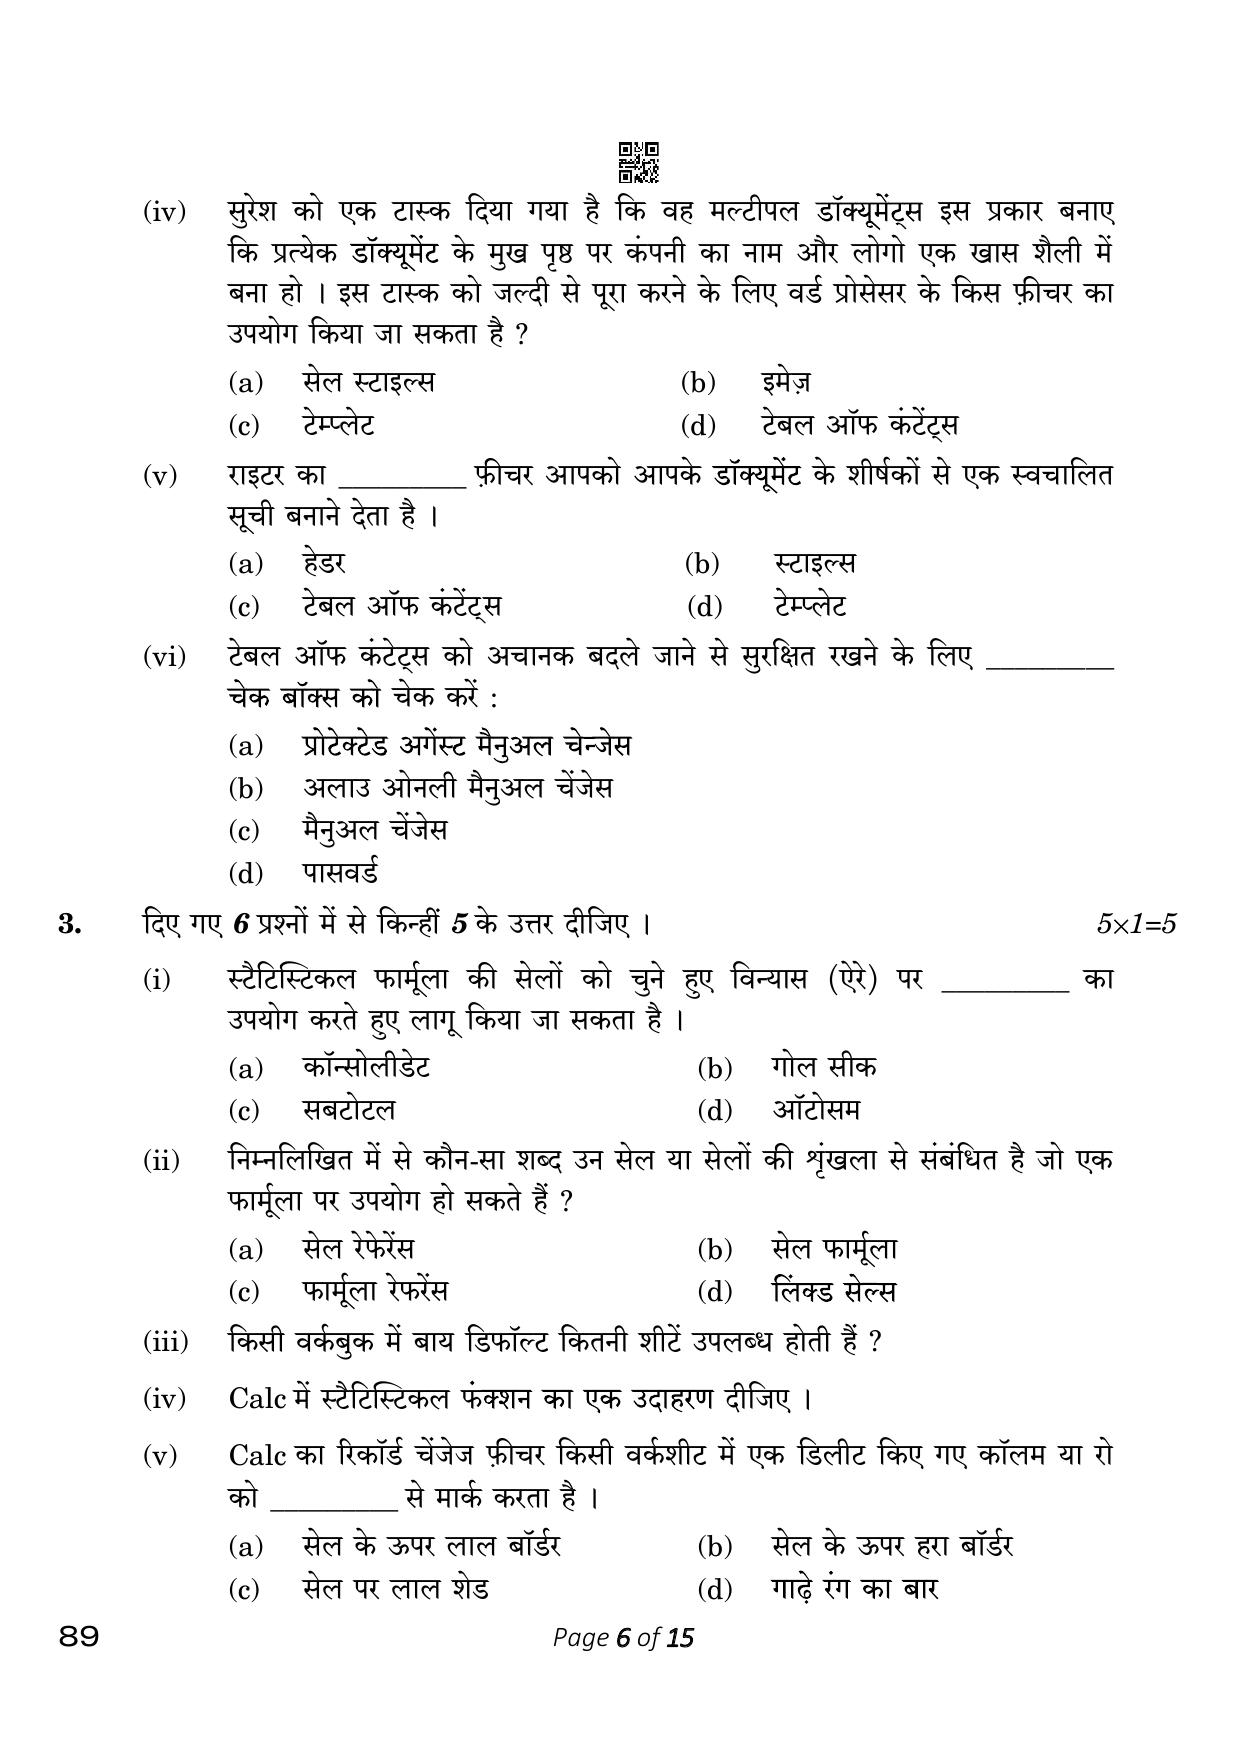 CBSE Class 10 Information Technology (Compartment) 2023 Question Paper - Page 6